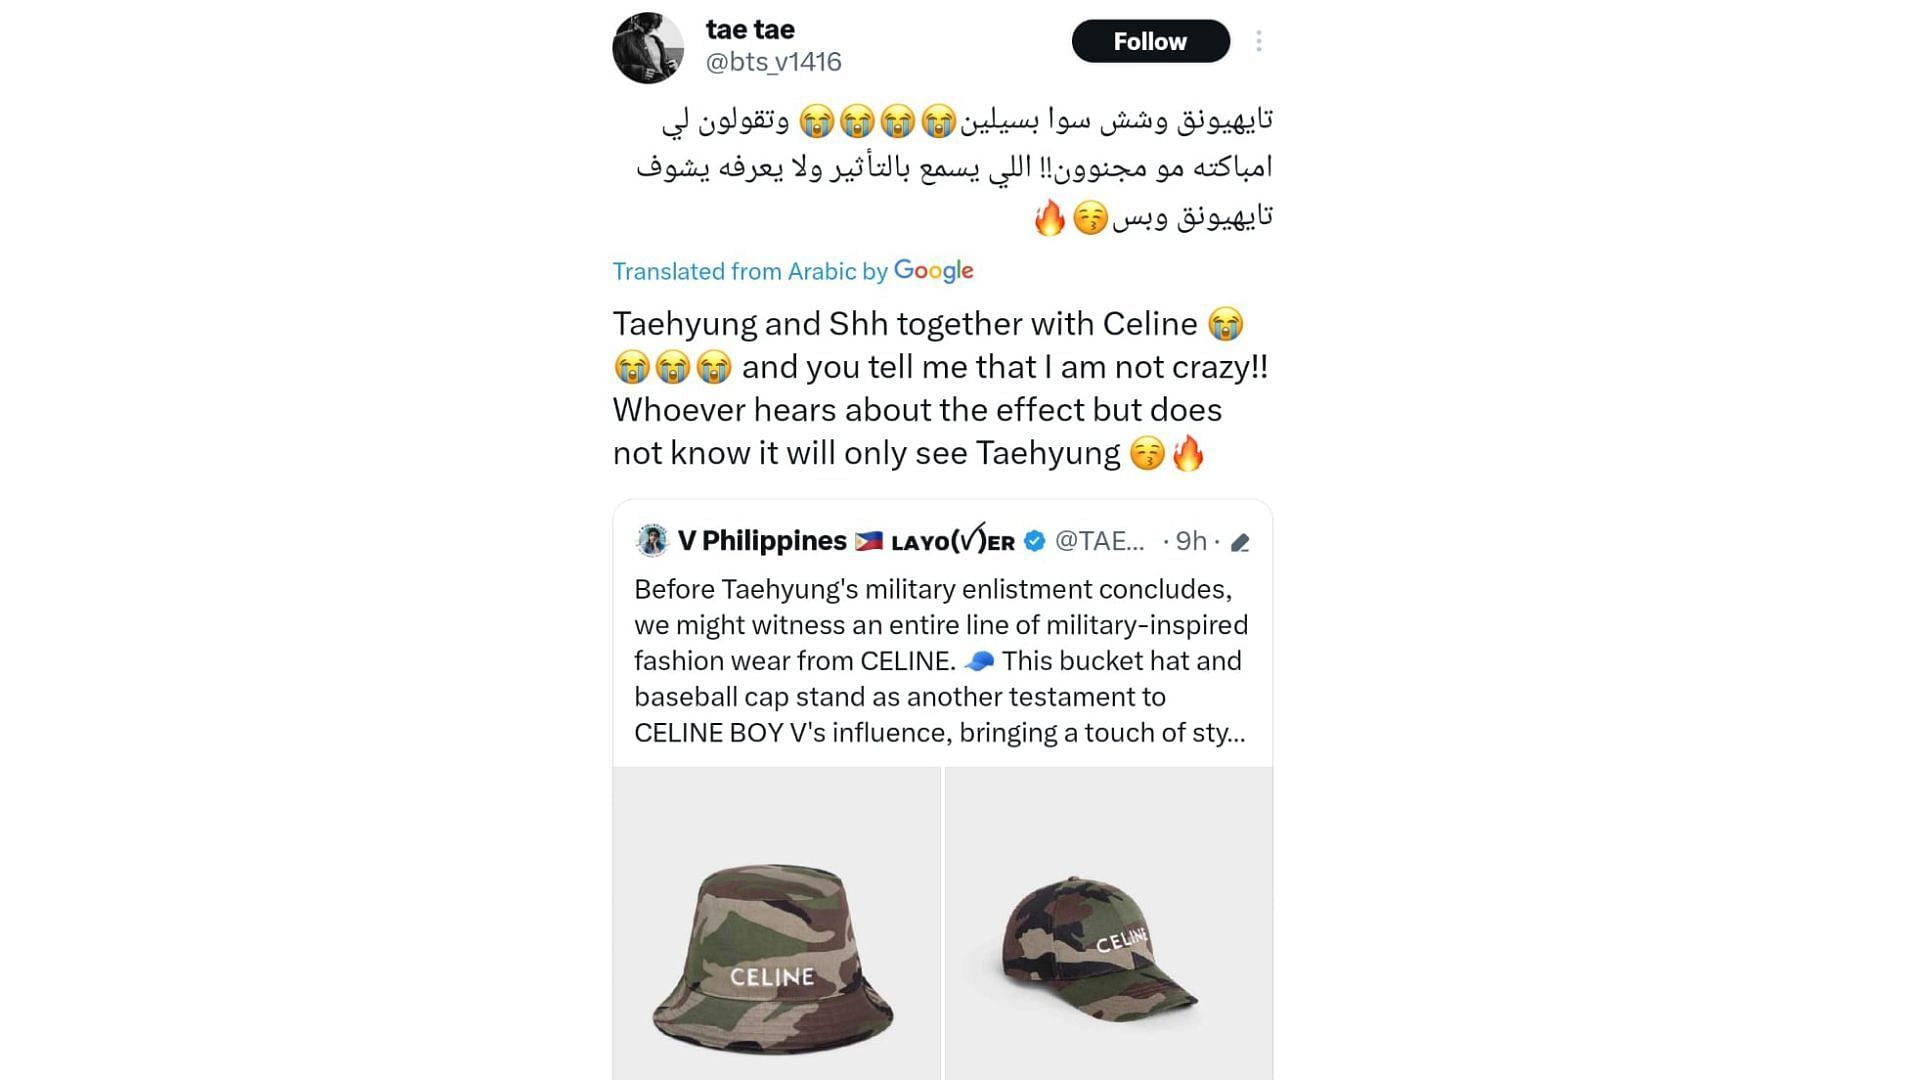 Fans react to CELINE&#039;s military-inspired bucket hat and cap as BTS&#039; V serves in the army (Image Via X/@bts_v1416)